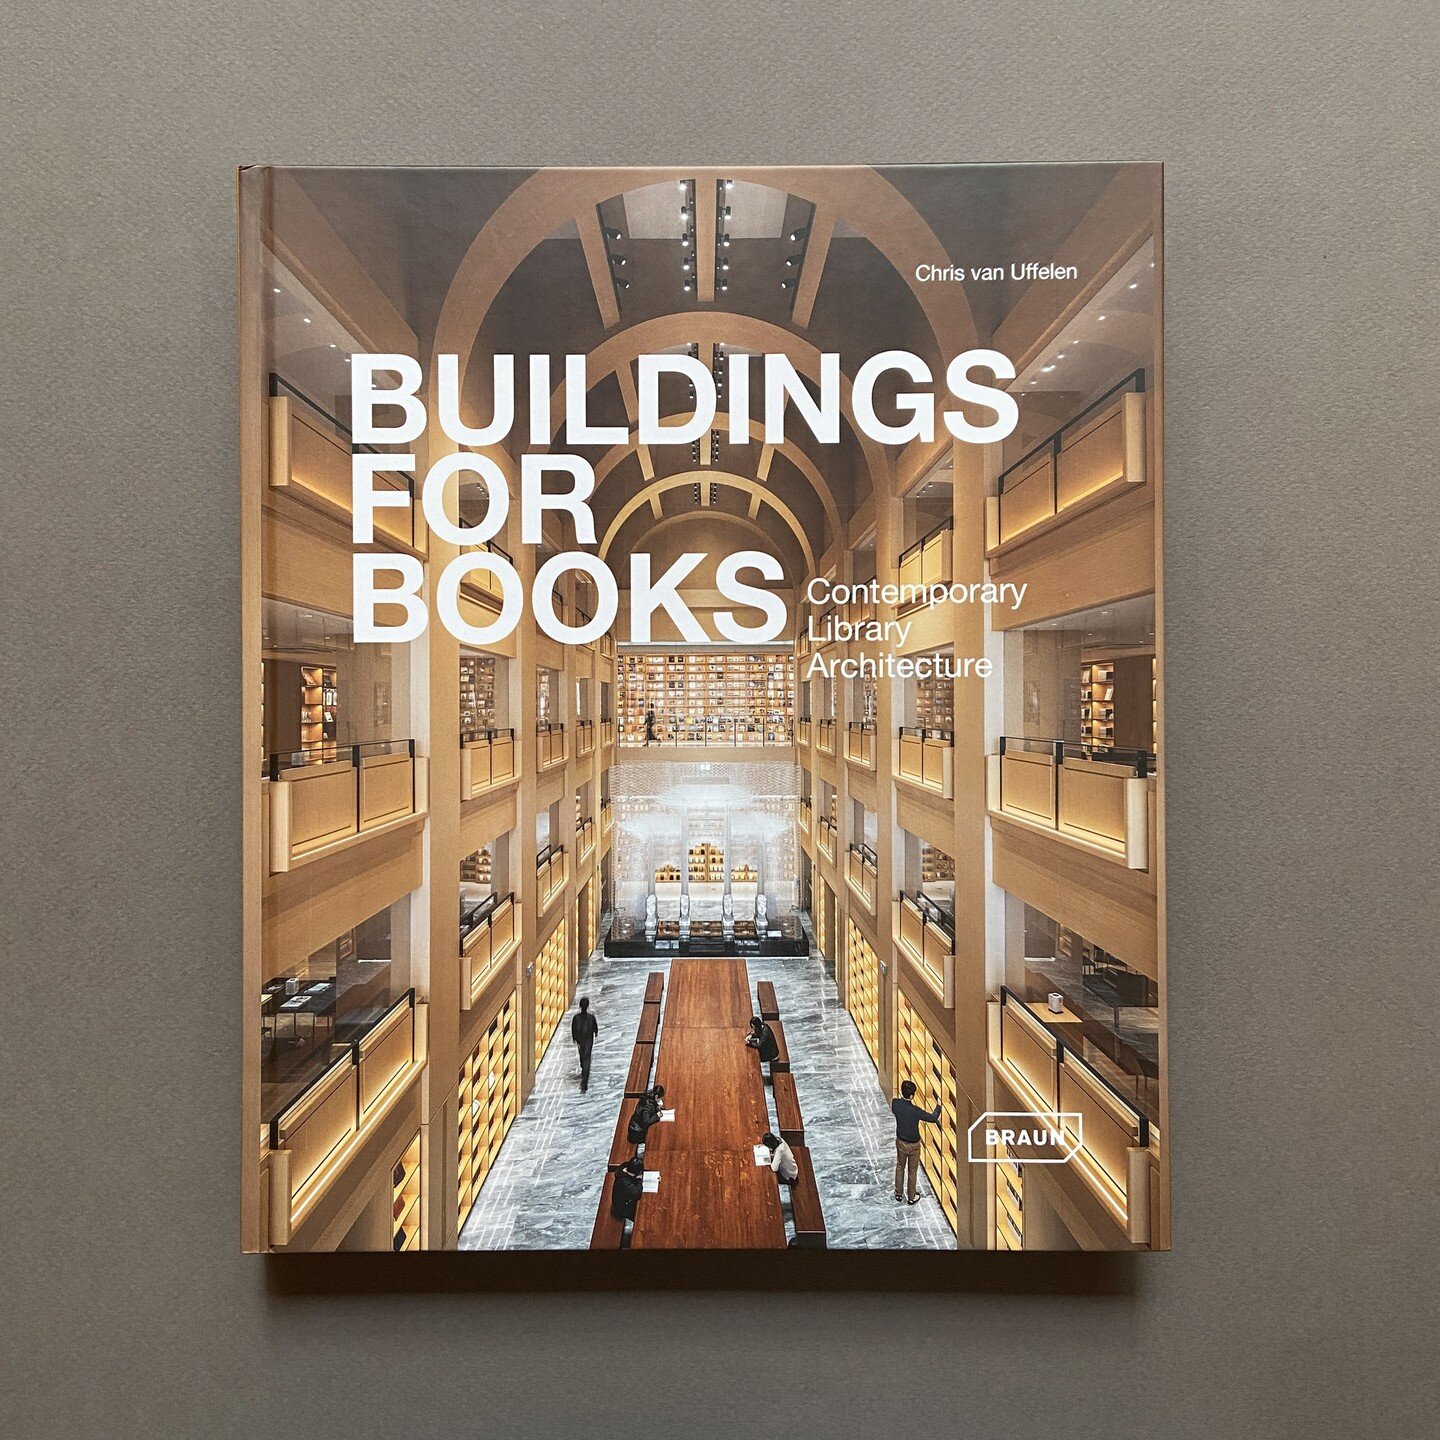 Functionally and esthetically compelling solutions for library building and spaces today that work for all users.

Libraries are spaces for learning, discovery, and also for interaction. Their architecture is currently the subject of much discussion,